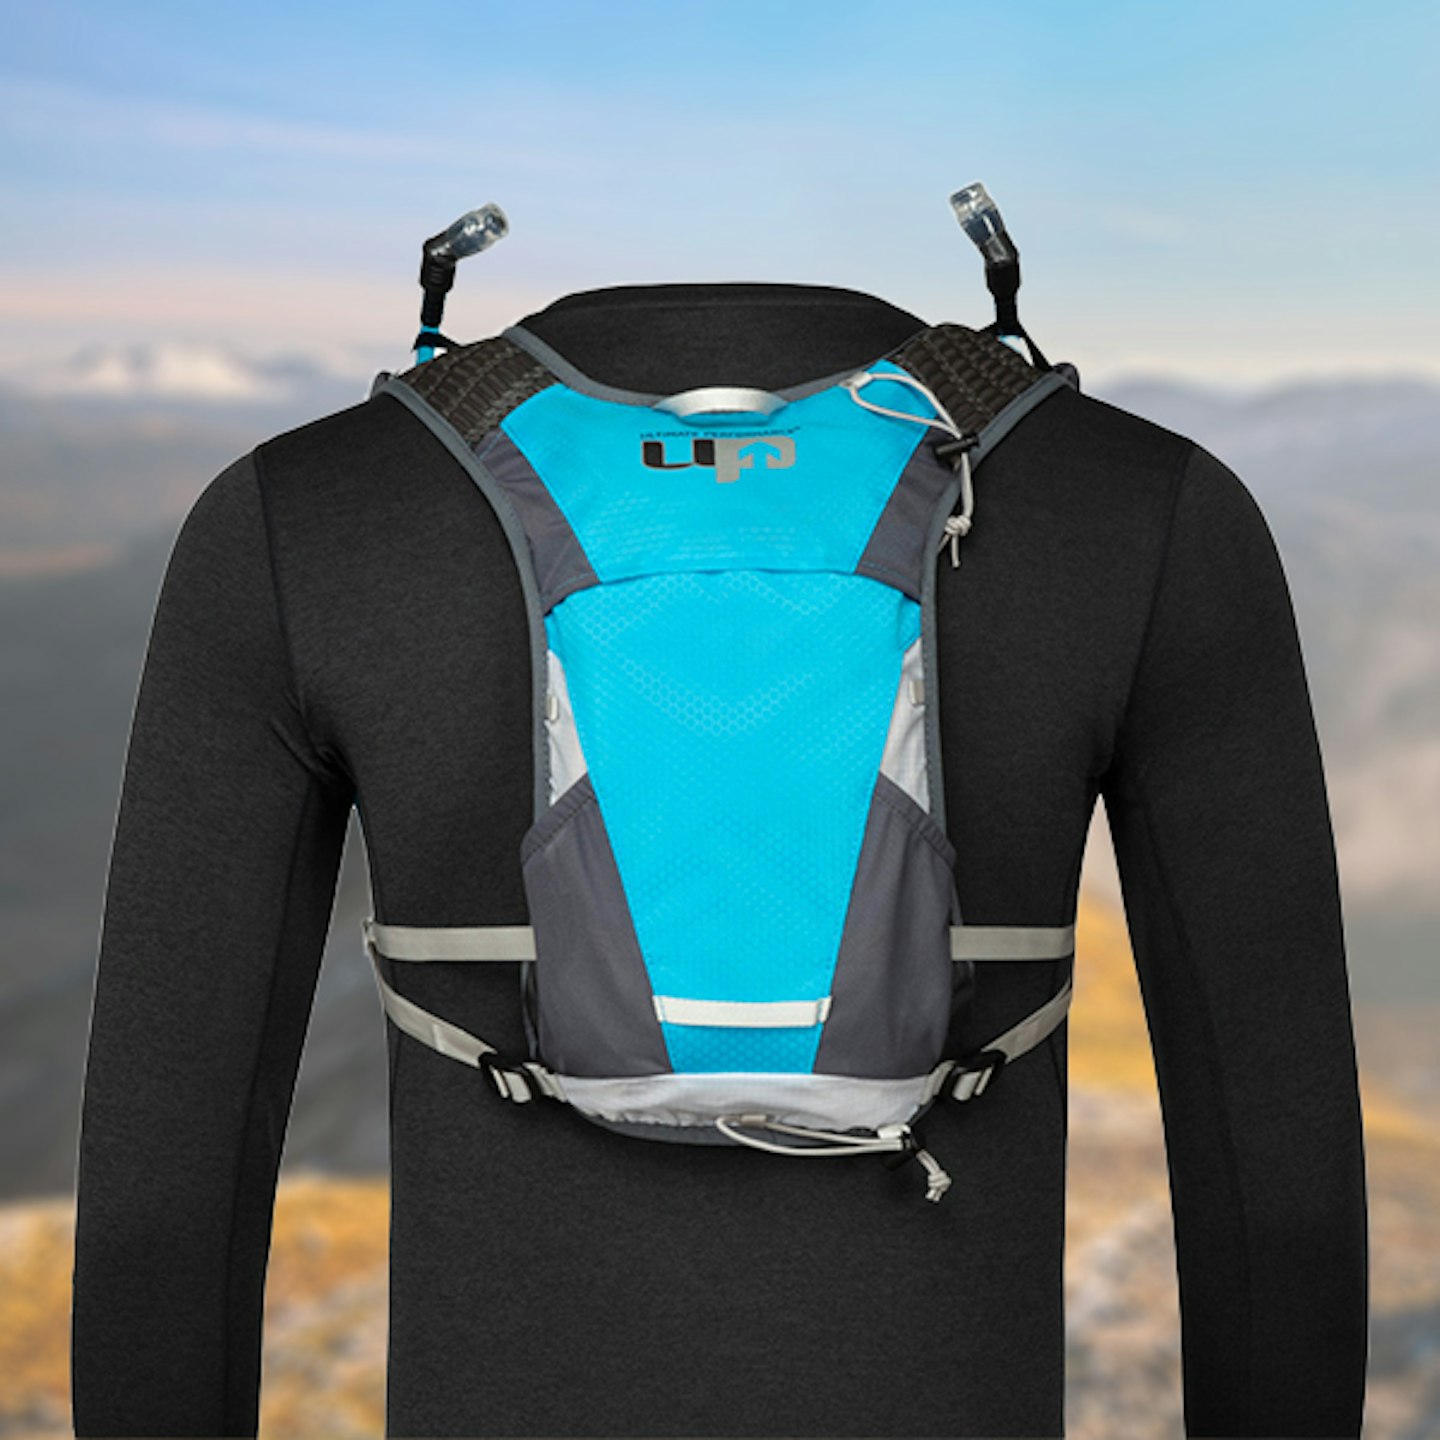 Ultimate Performance Leader Hydration pack